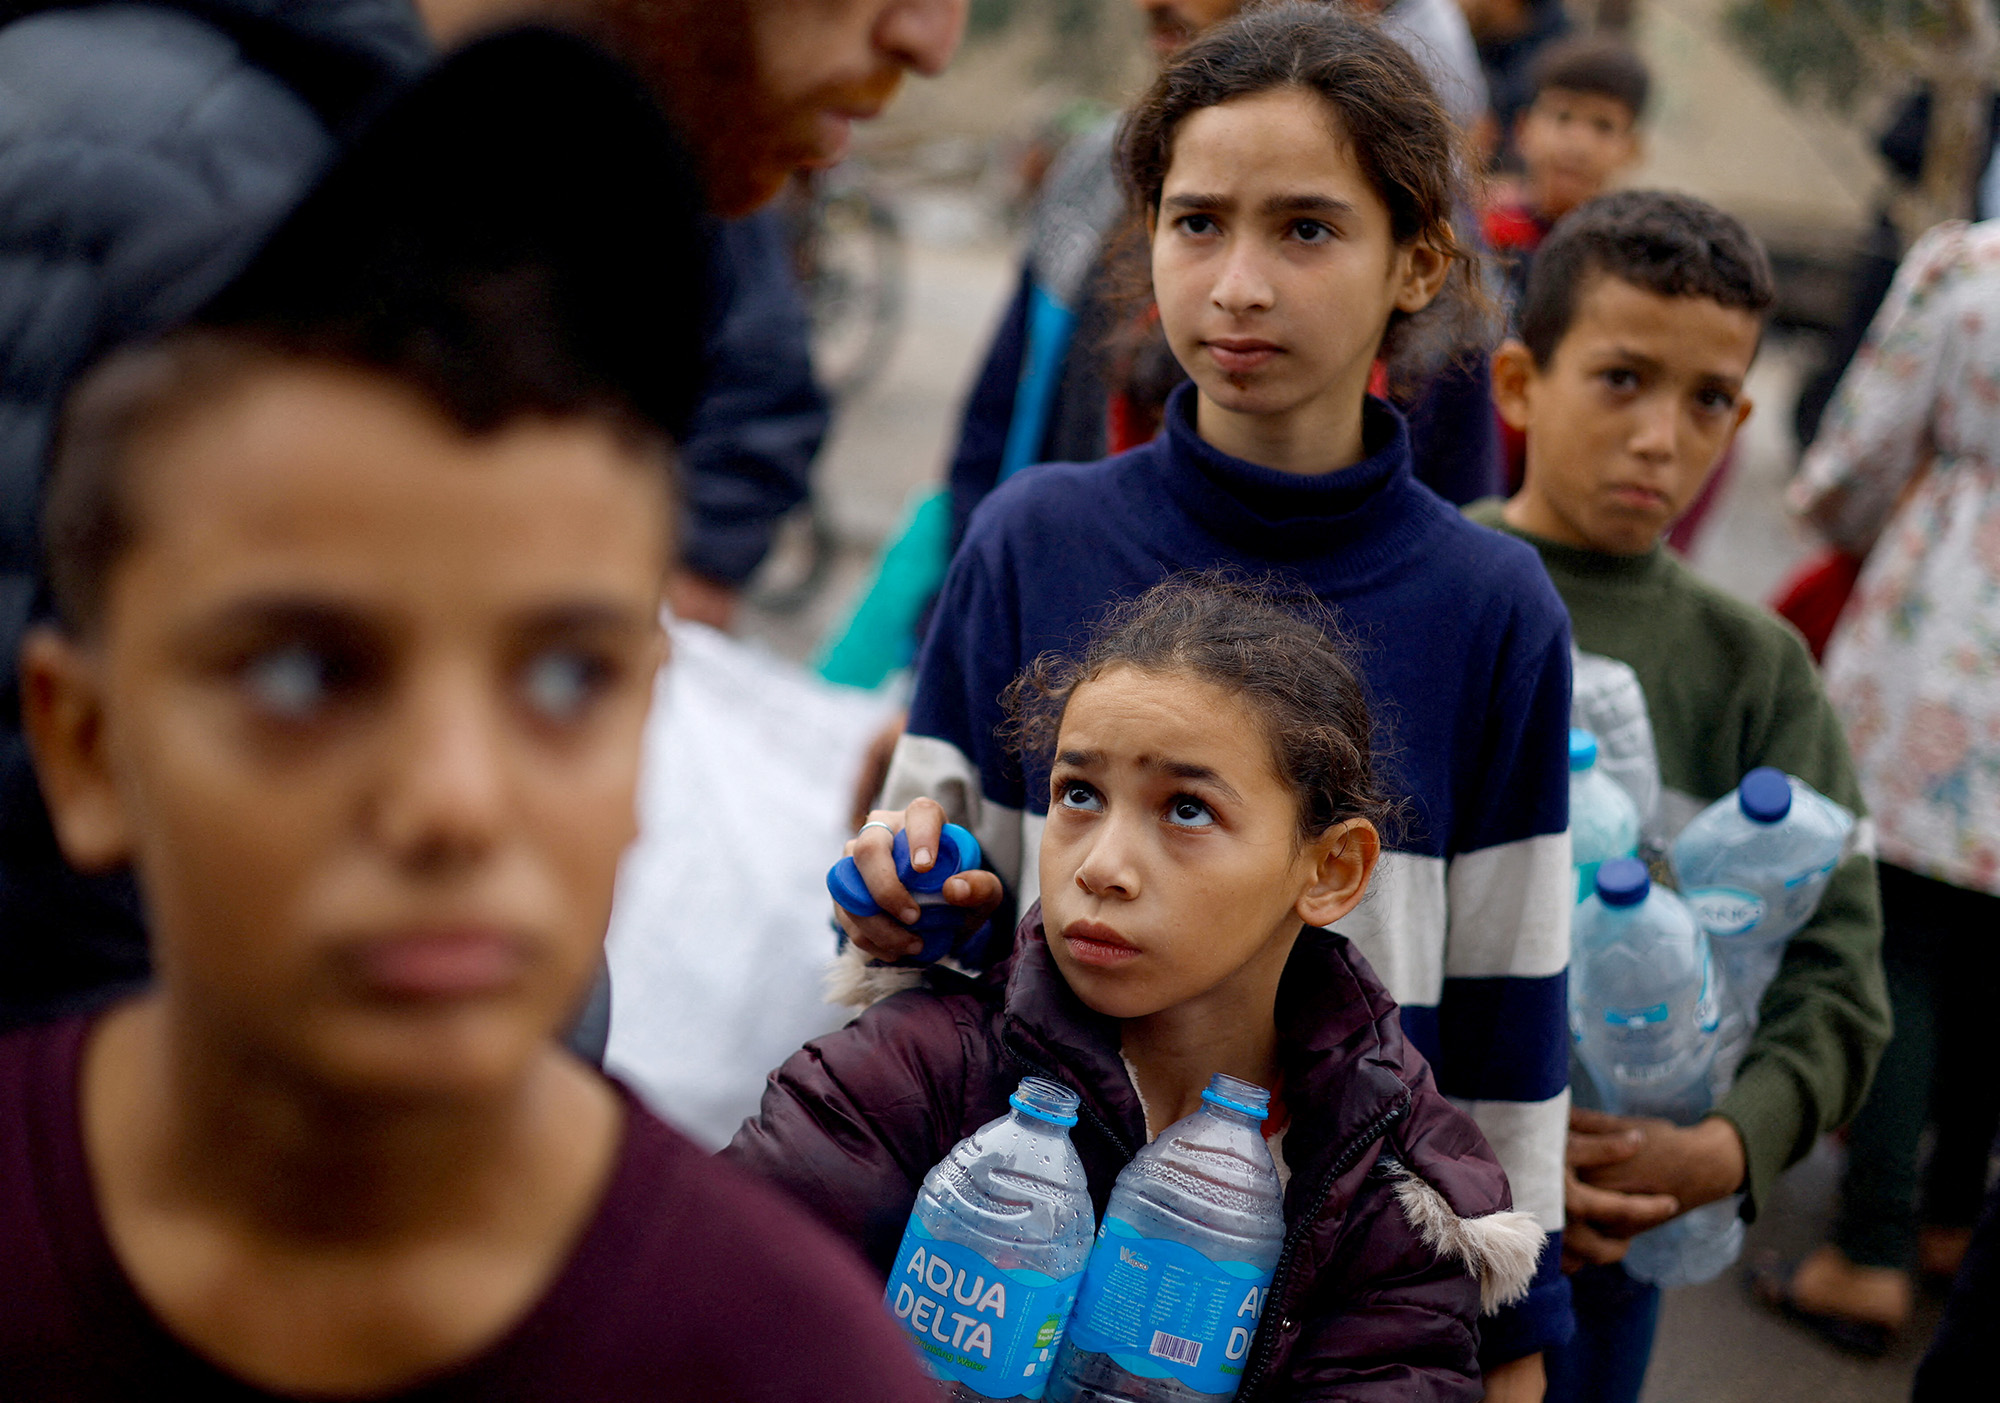 Palestinian children hold empty water bottles as they queue to collect water in Rafah, Gaza, on December 5.